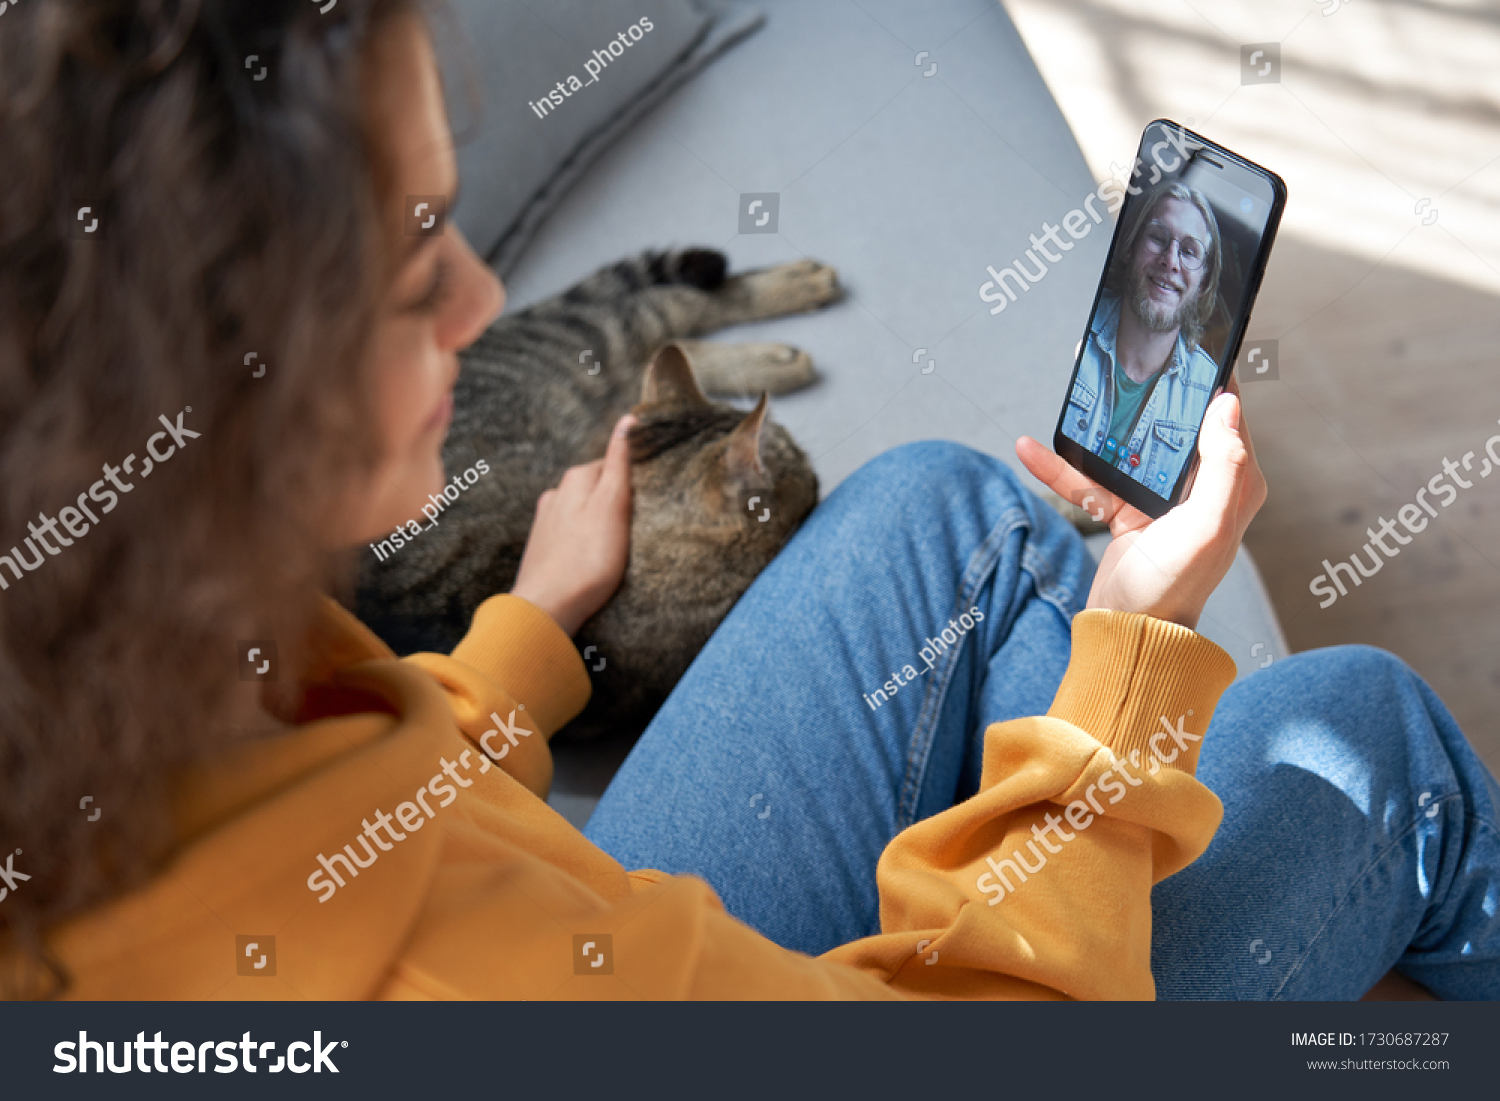 Young hispanic latin teen girl relax sit on sofa with cat at home holding phone video calling distance friend dating online on mobile screen using smartphone videochat app. Over shoulder closeup view #1730687287